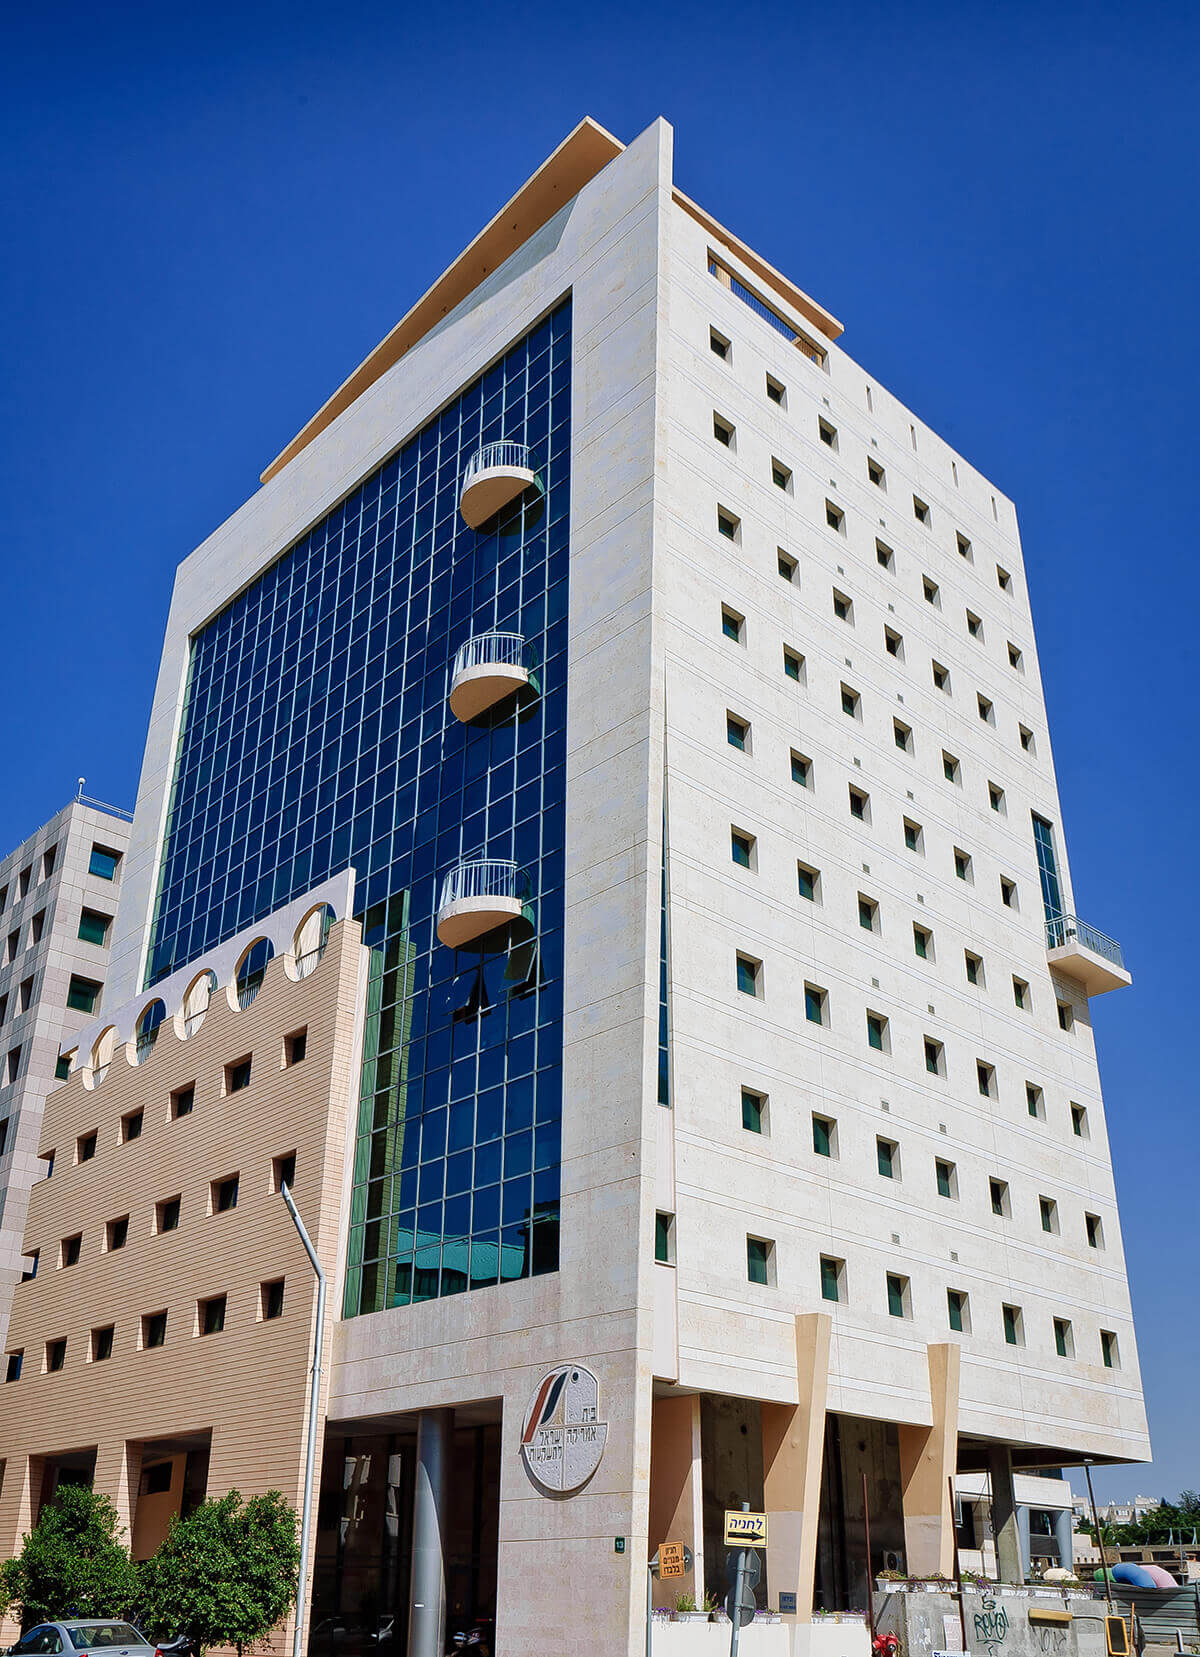 Photograph of a building from the America Israel House project in Ramat Gan